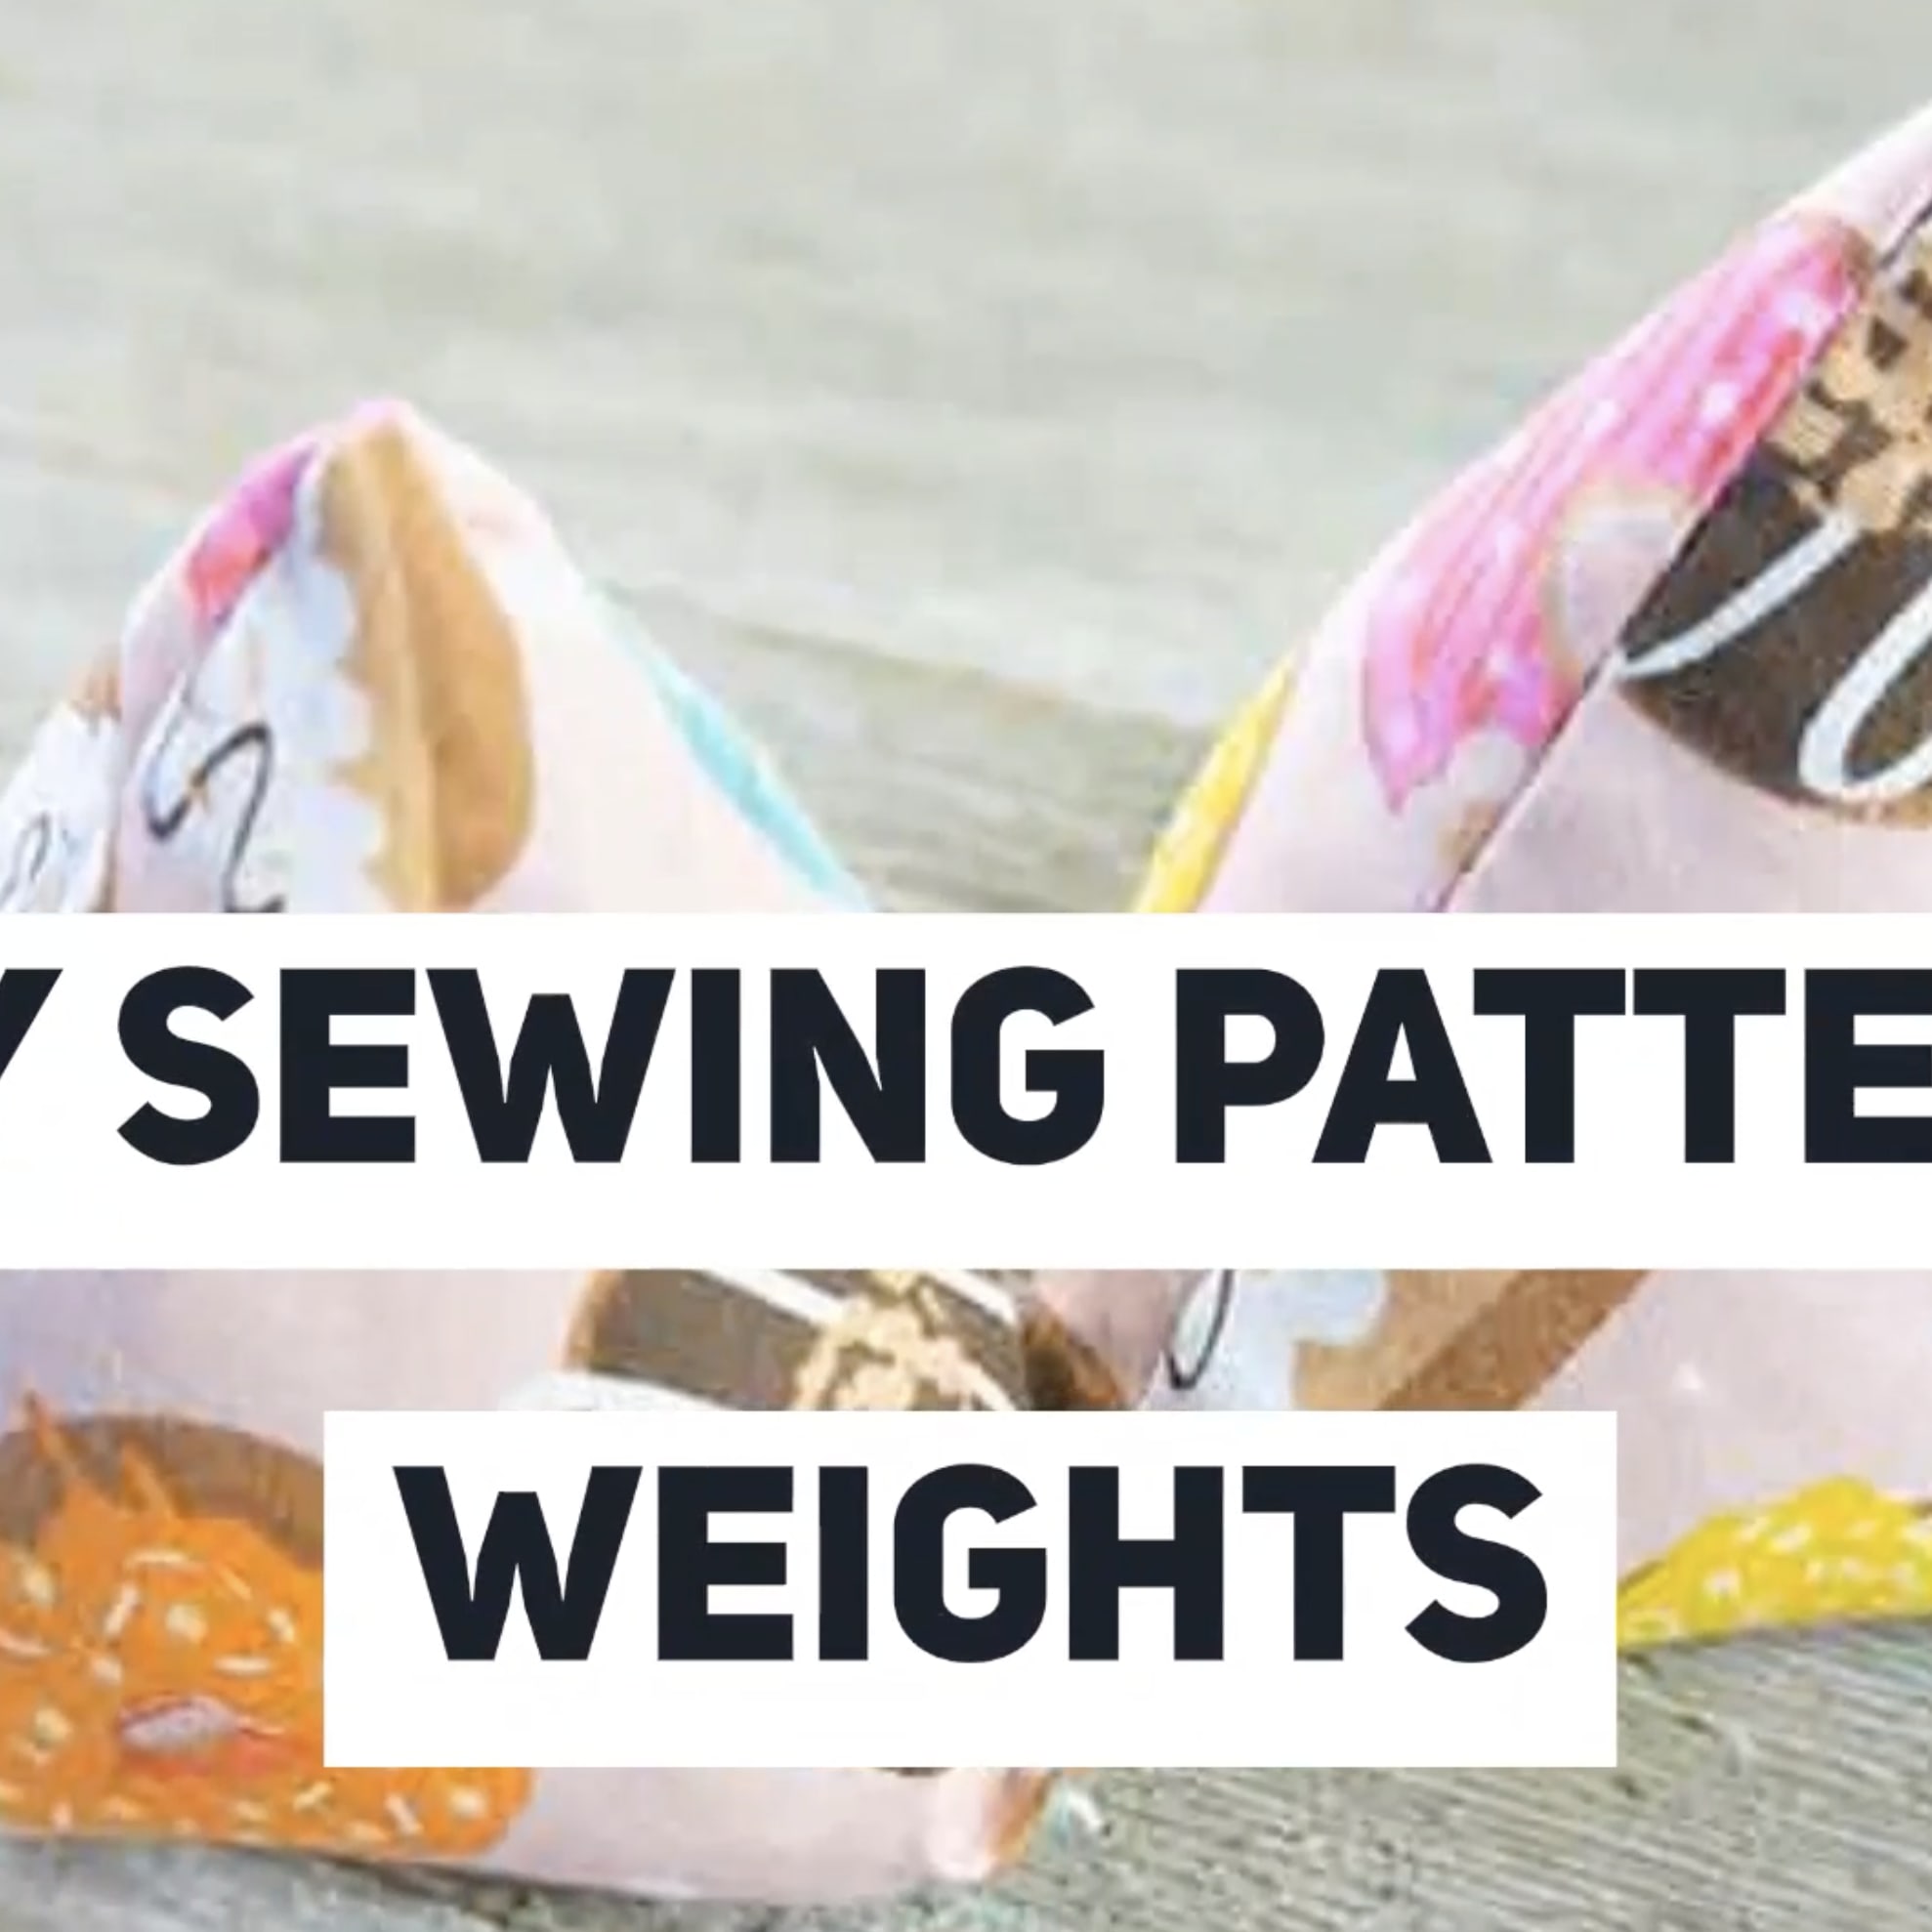 DIY Pattern Weights – The Daily Sew